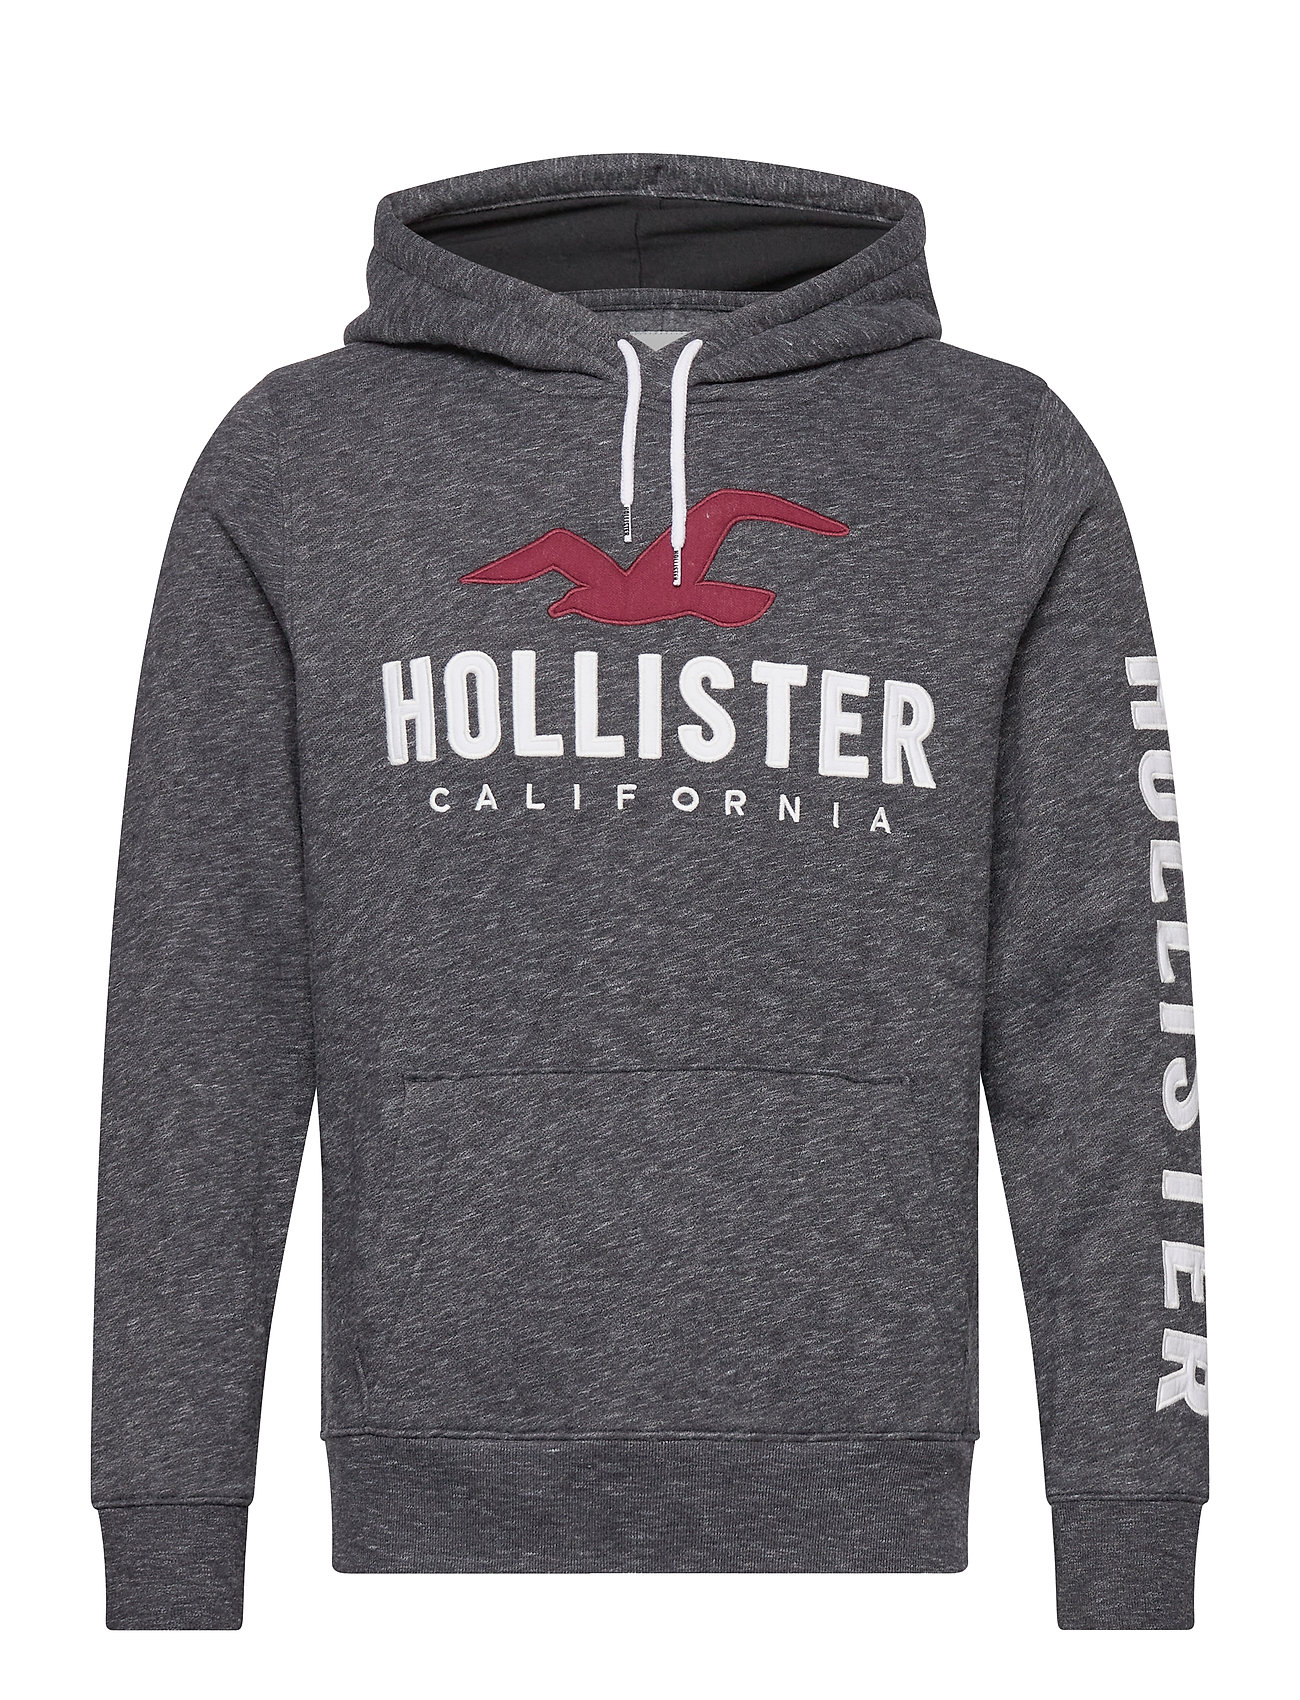 hollister at the outlets